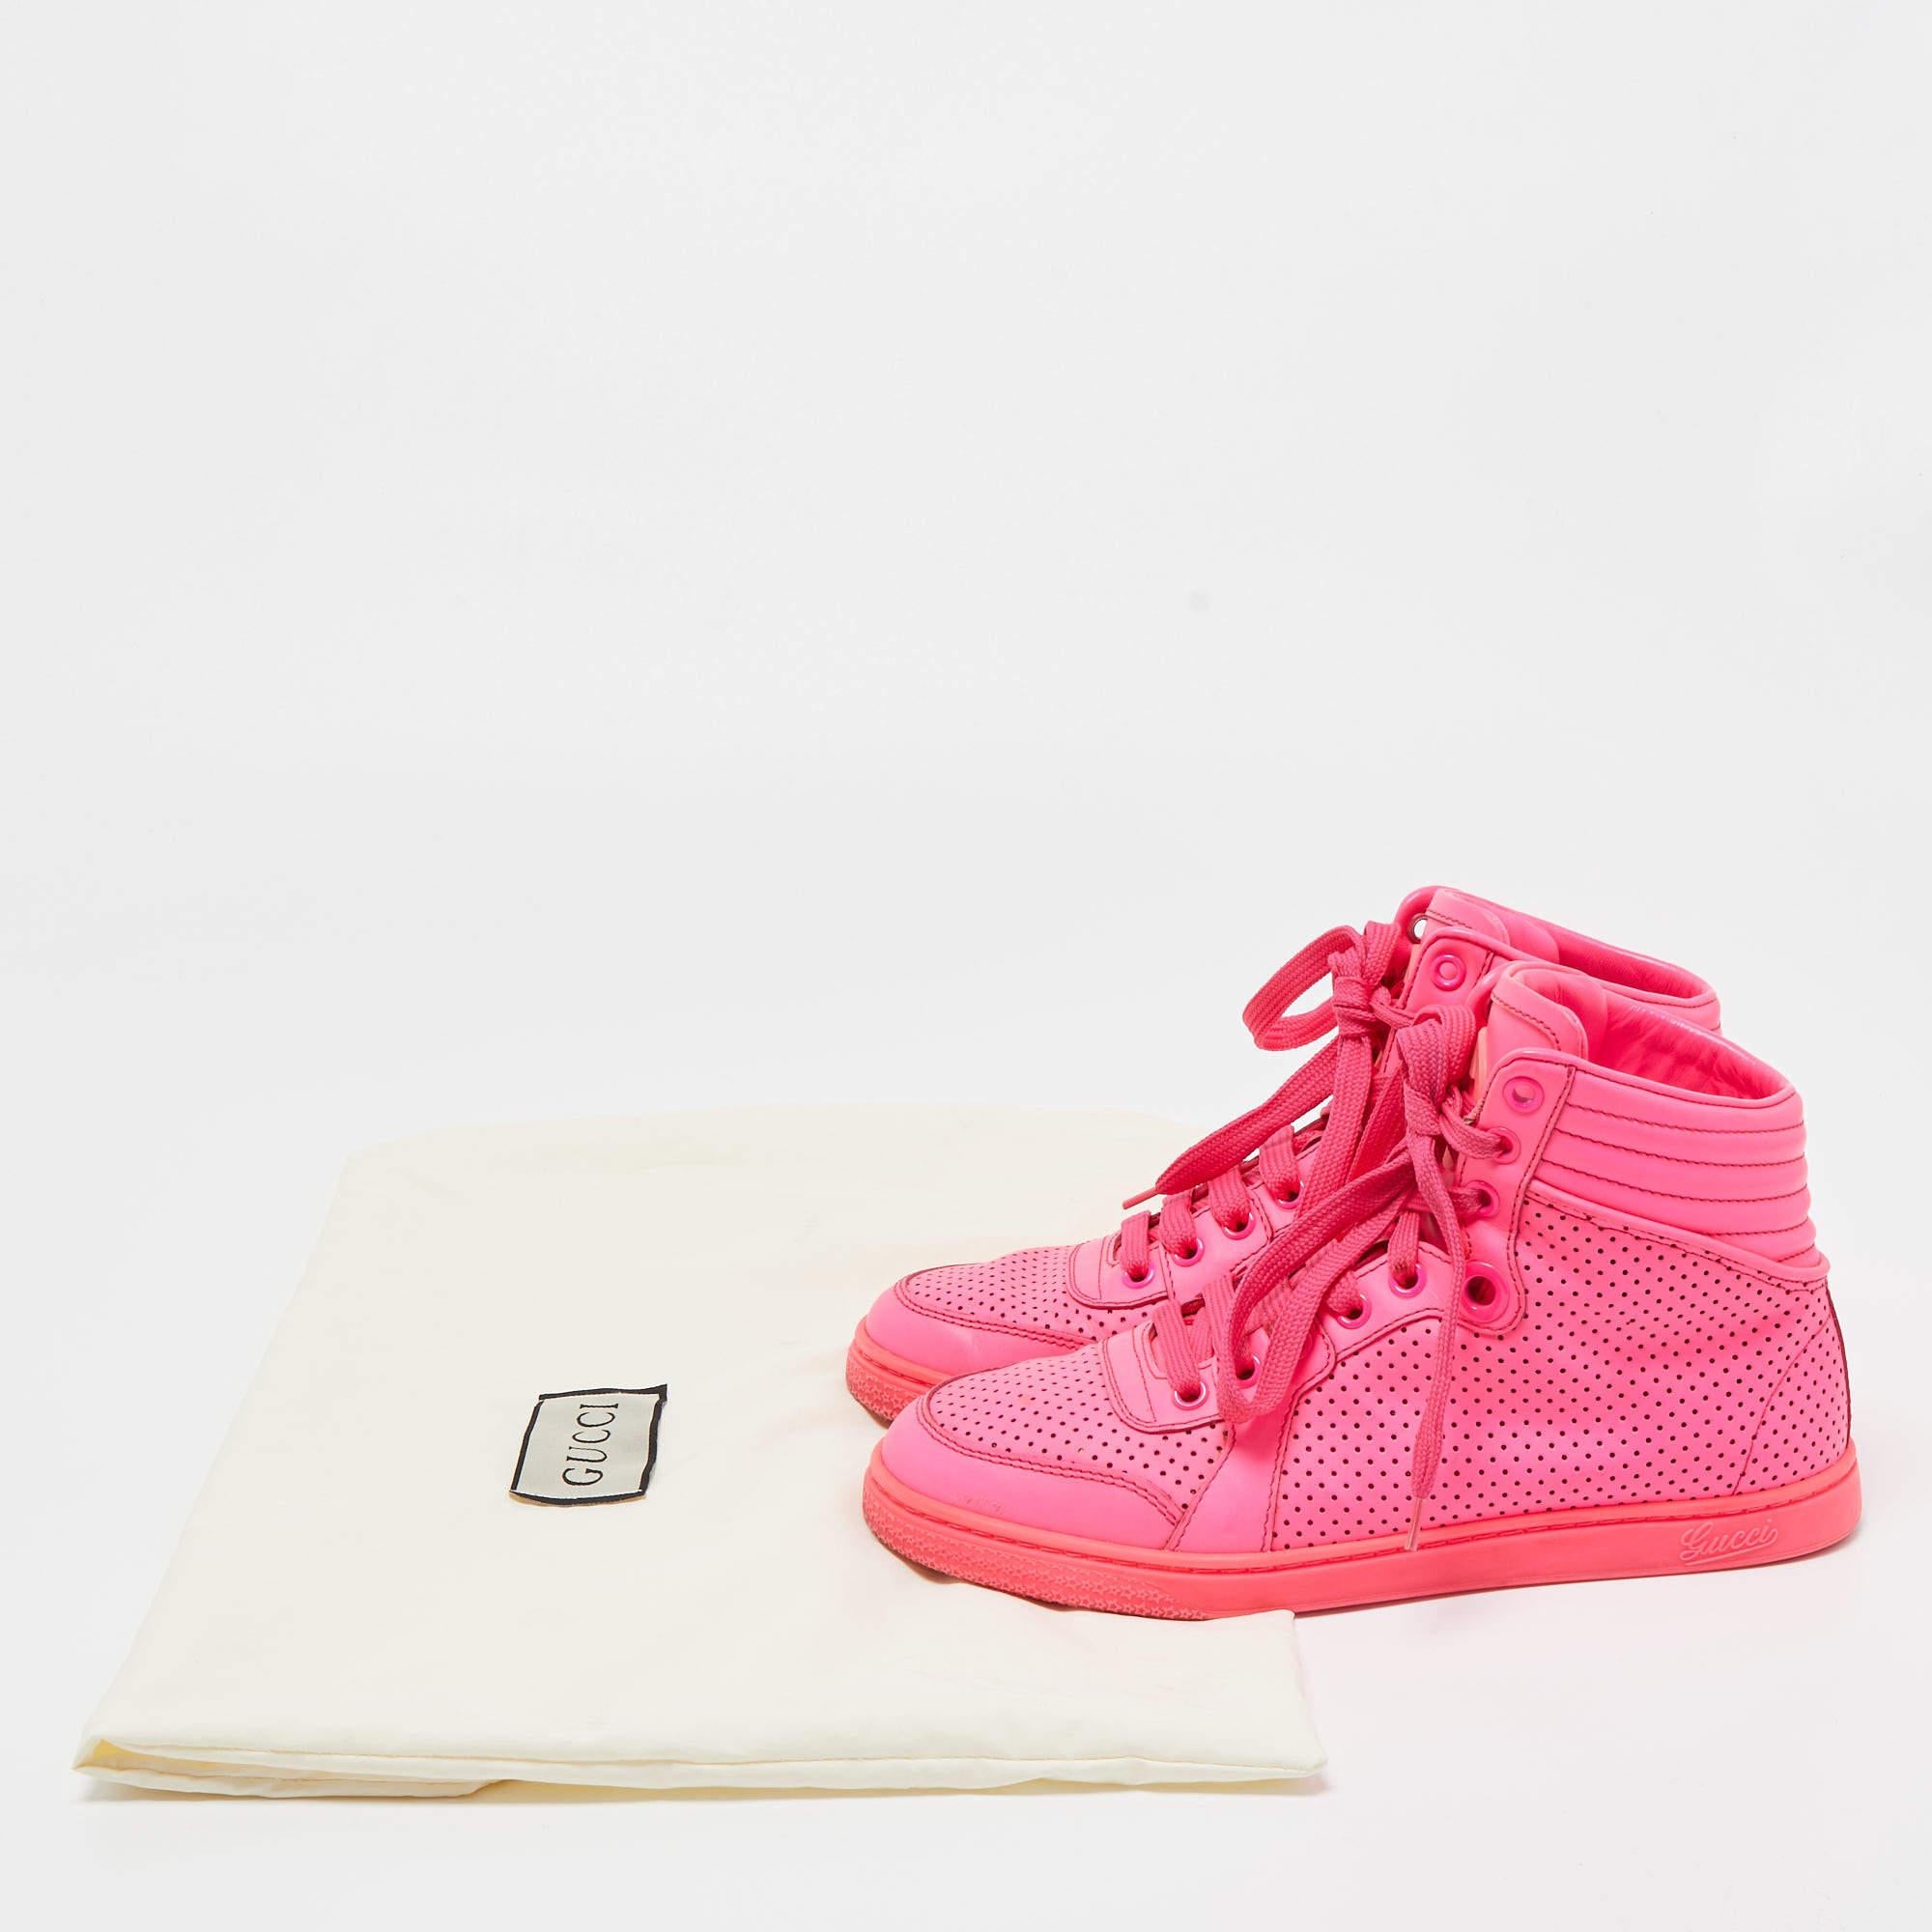 Gucci Neon Pink Perforated Leather Coda High Top Sneakers Size 35.5 For Sale 5